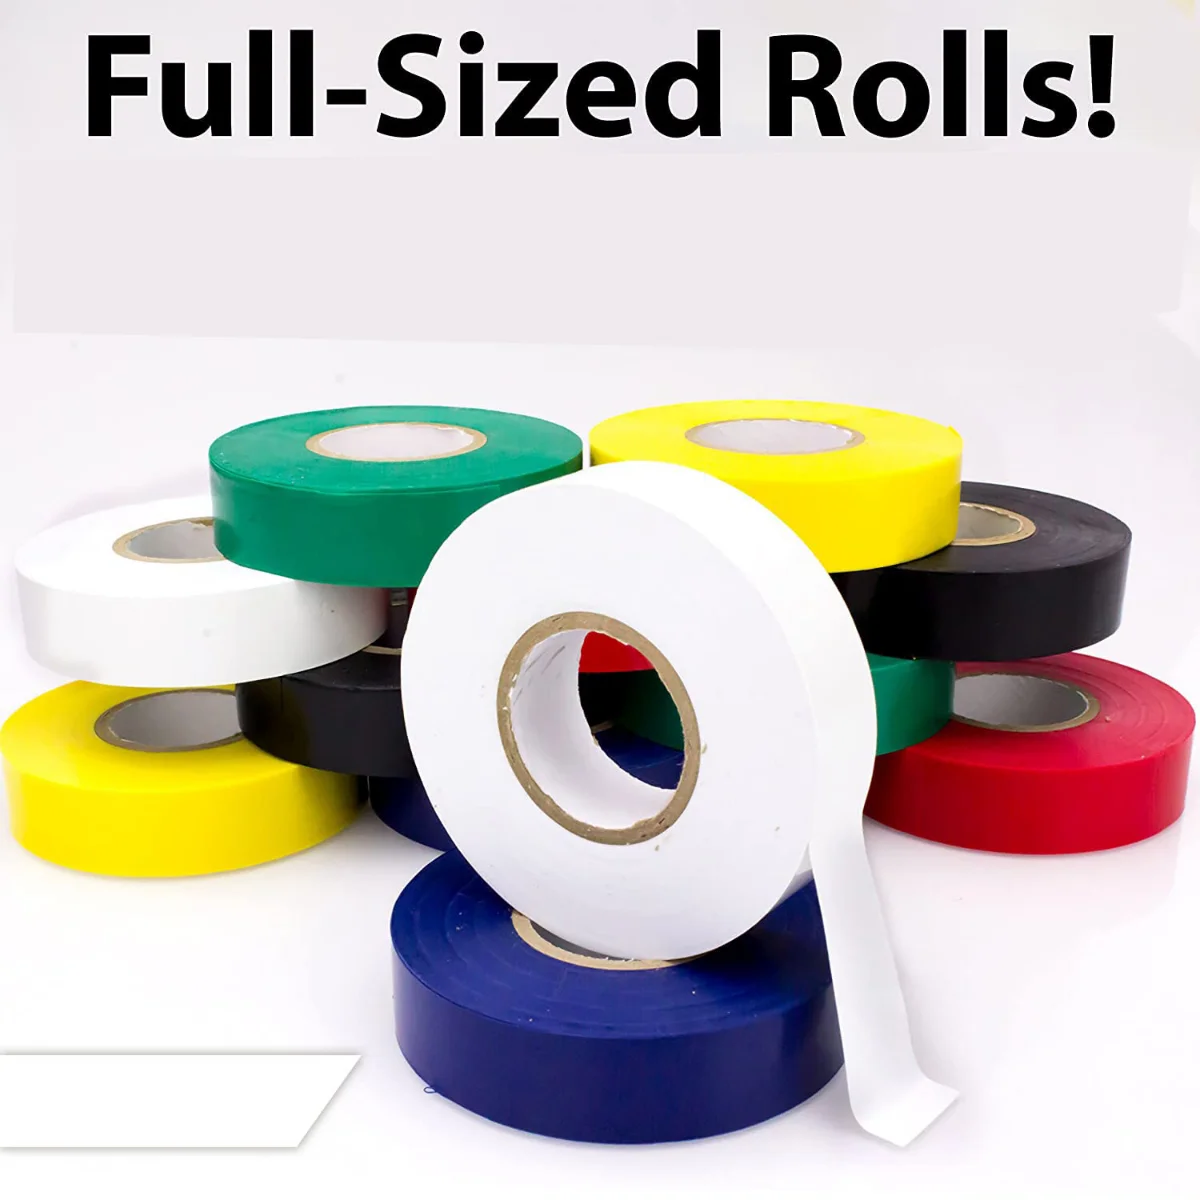 20ft Weather-Resistant Colored Electrical Tape.Color Your Electric Wiring Safely with Indoor/Outdoor PVC Vinyl,UL Listed to 600V